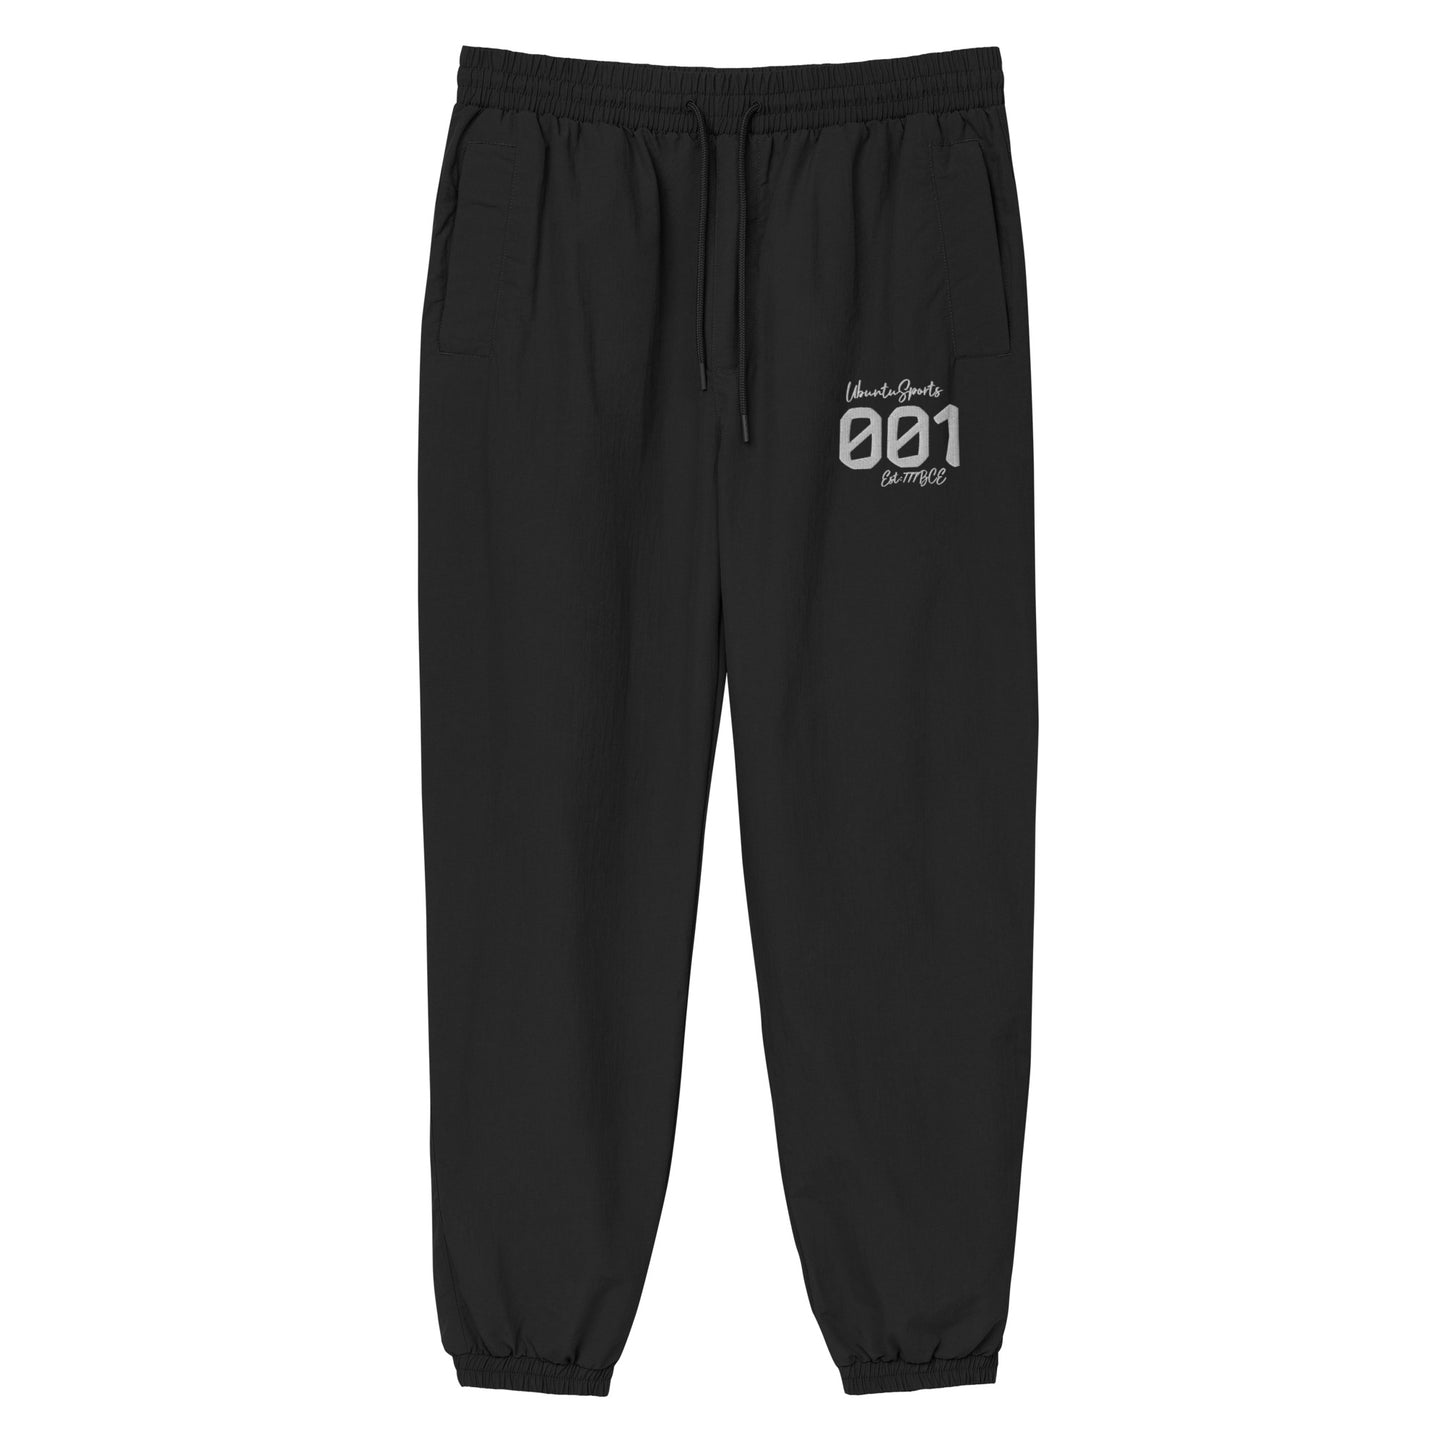 II-tracksuit trousers